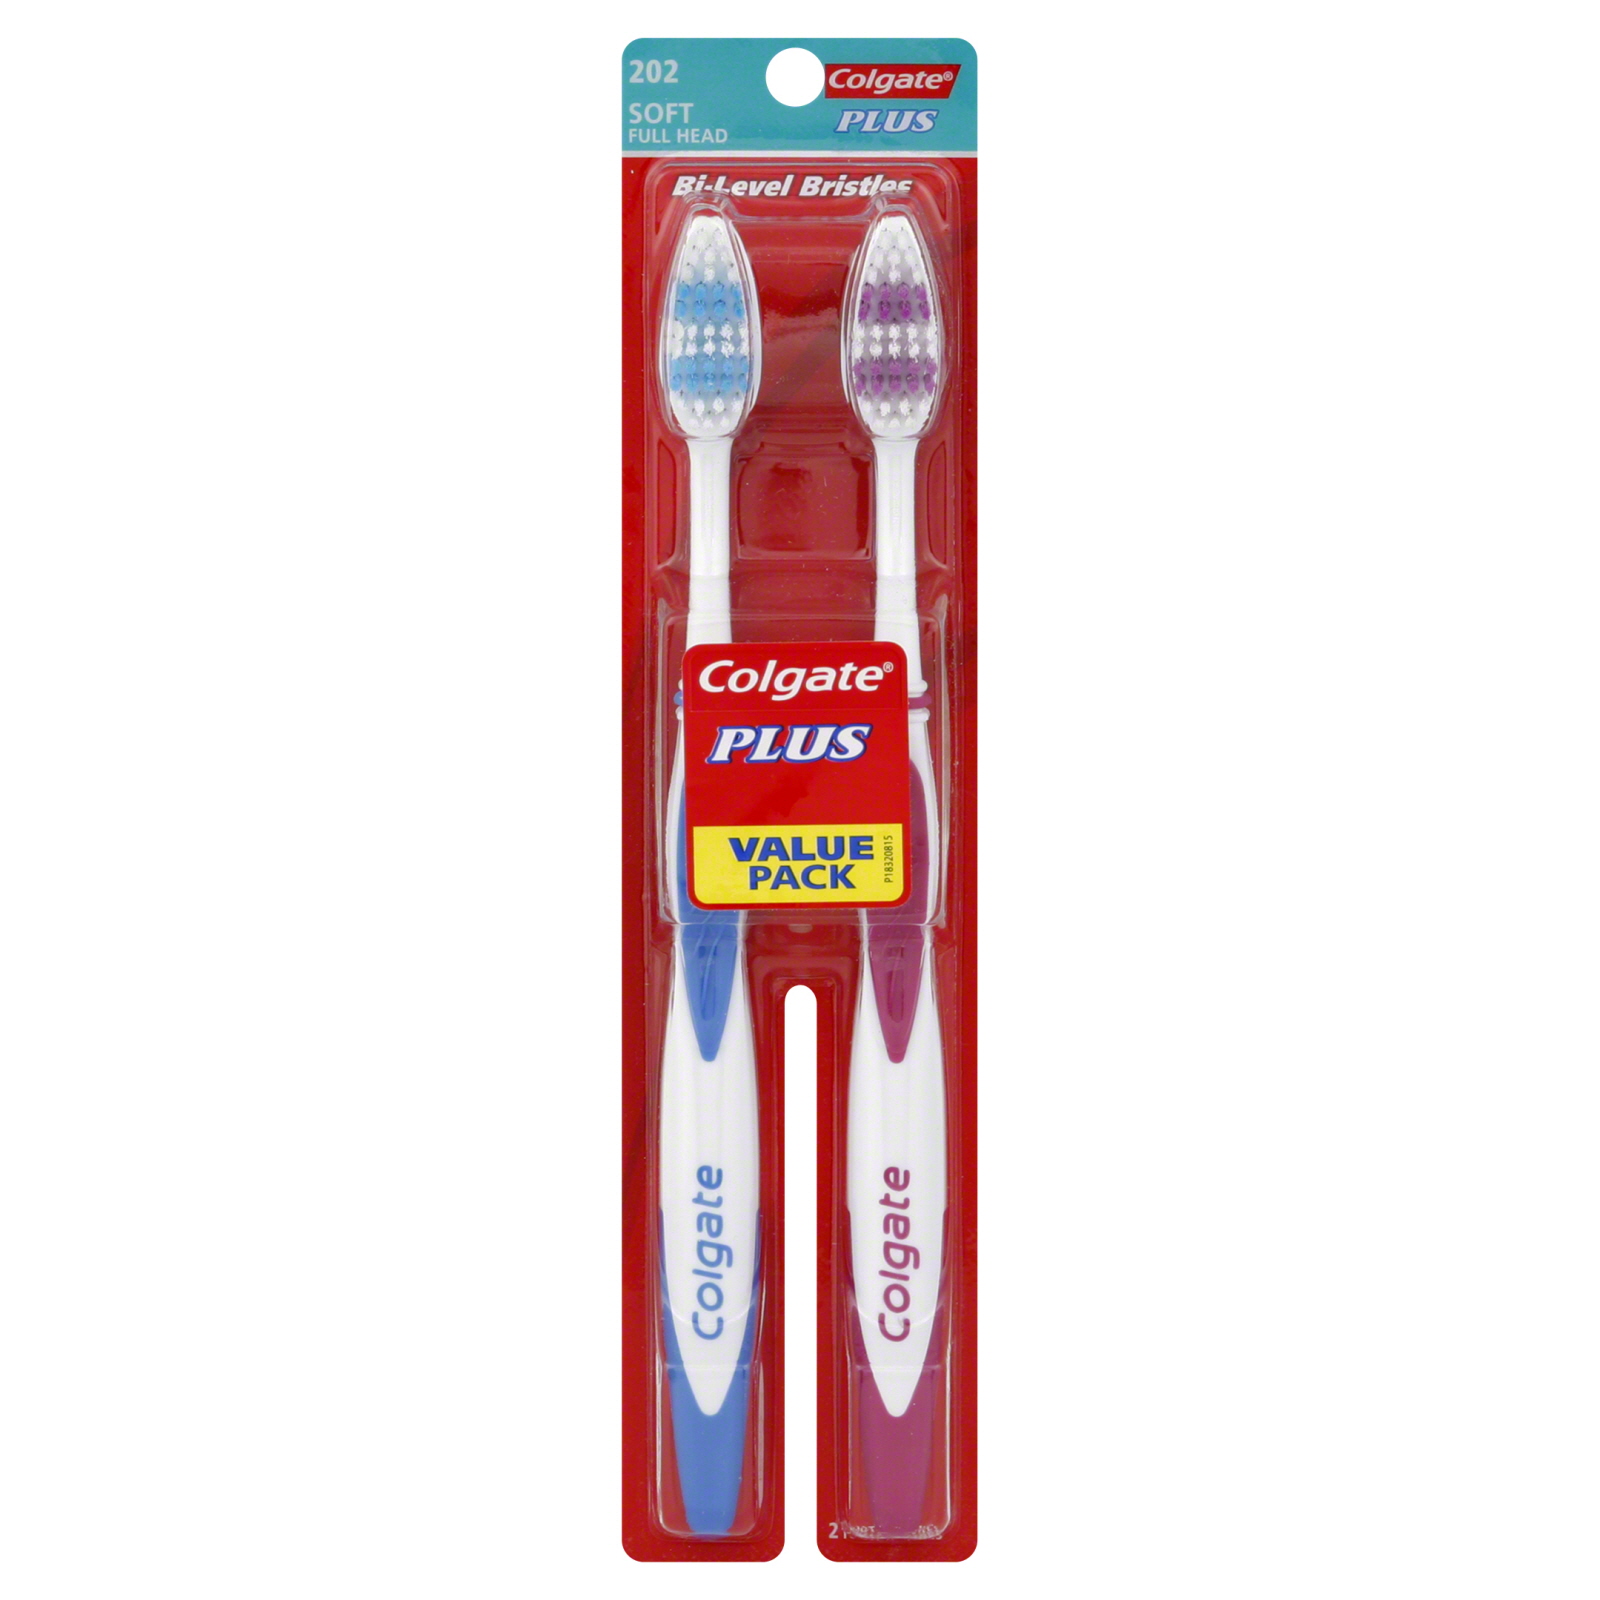 Colgate Plus Toothbrushes, Full Head, Soft 202, Value Pack, 2 toothbrushes